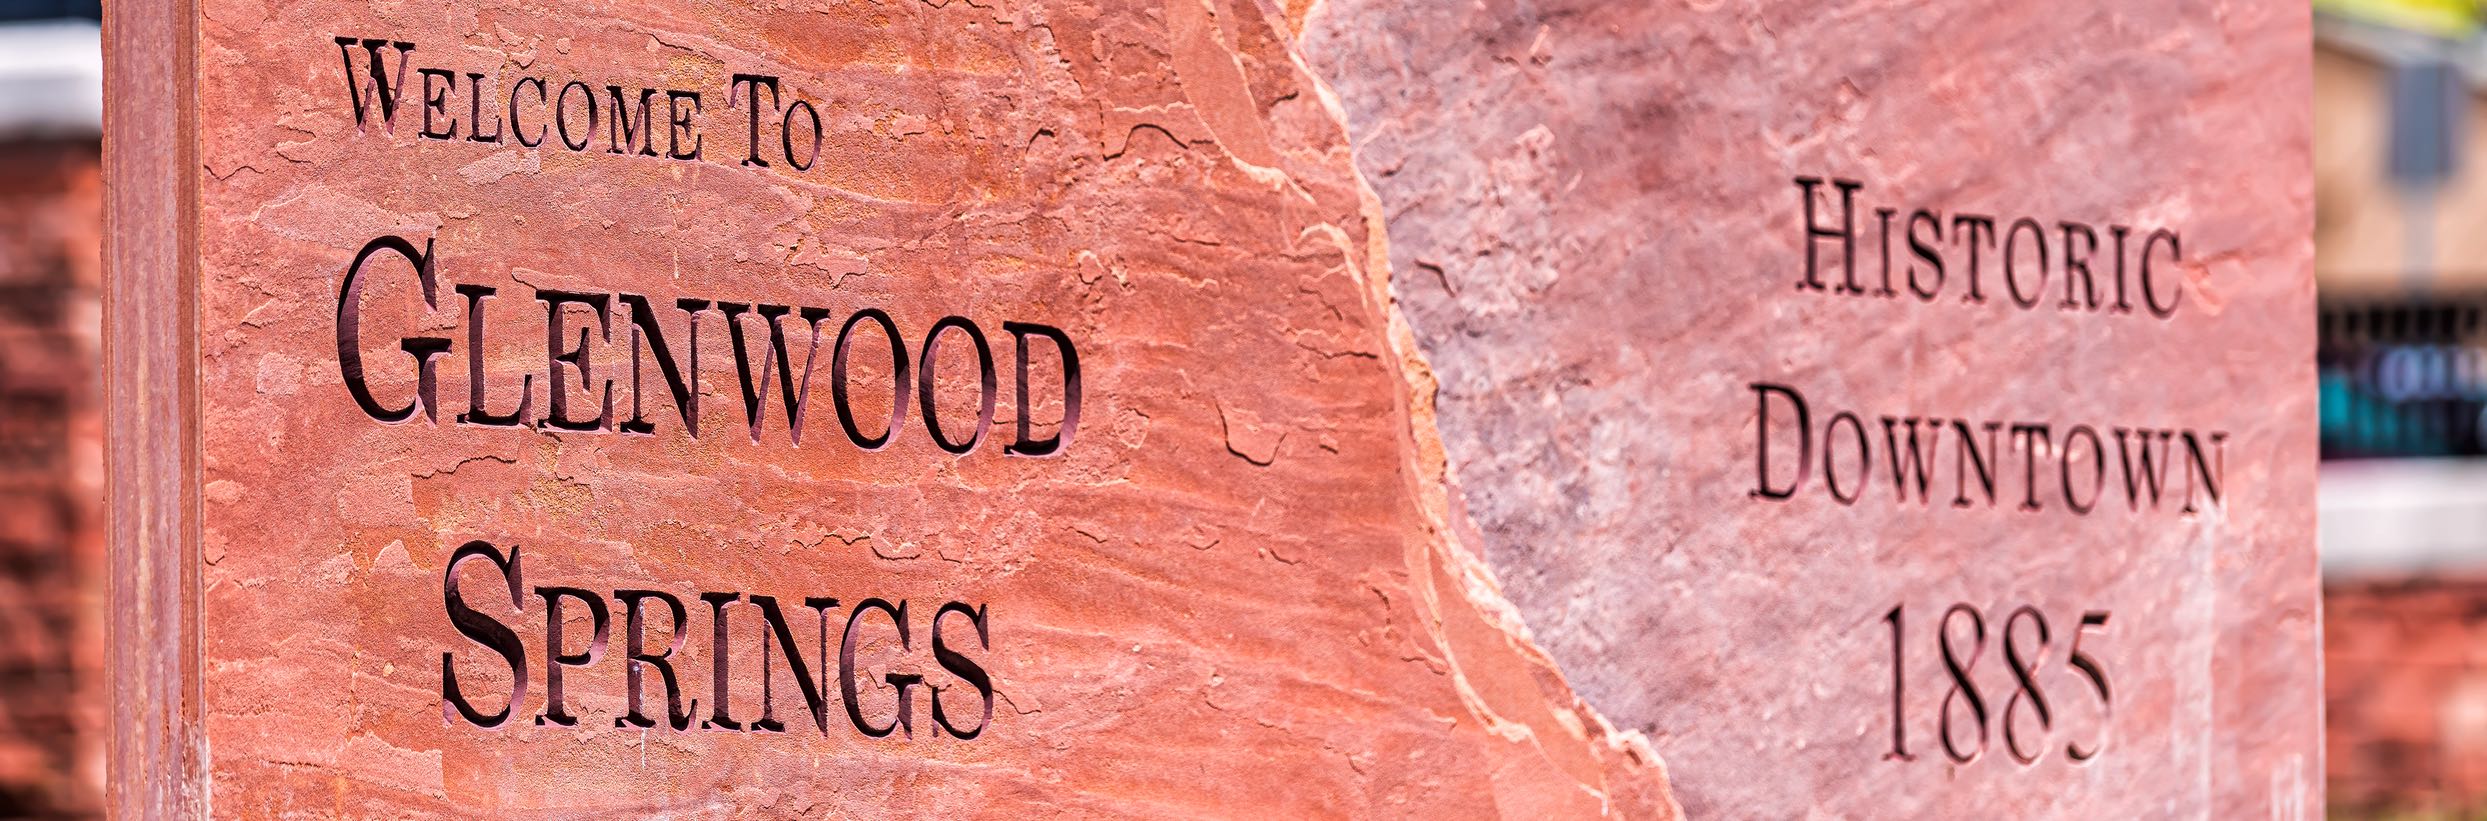 A welcoming rock sign bearing the inscription "Welcome to Glenwood Springs" and "Historic Downtown 1885."